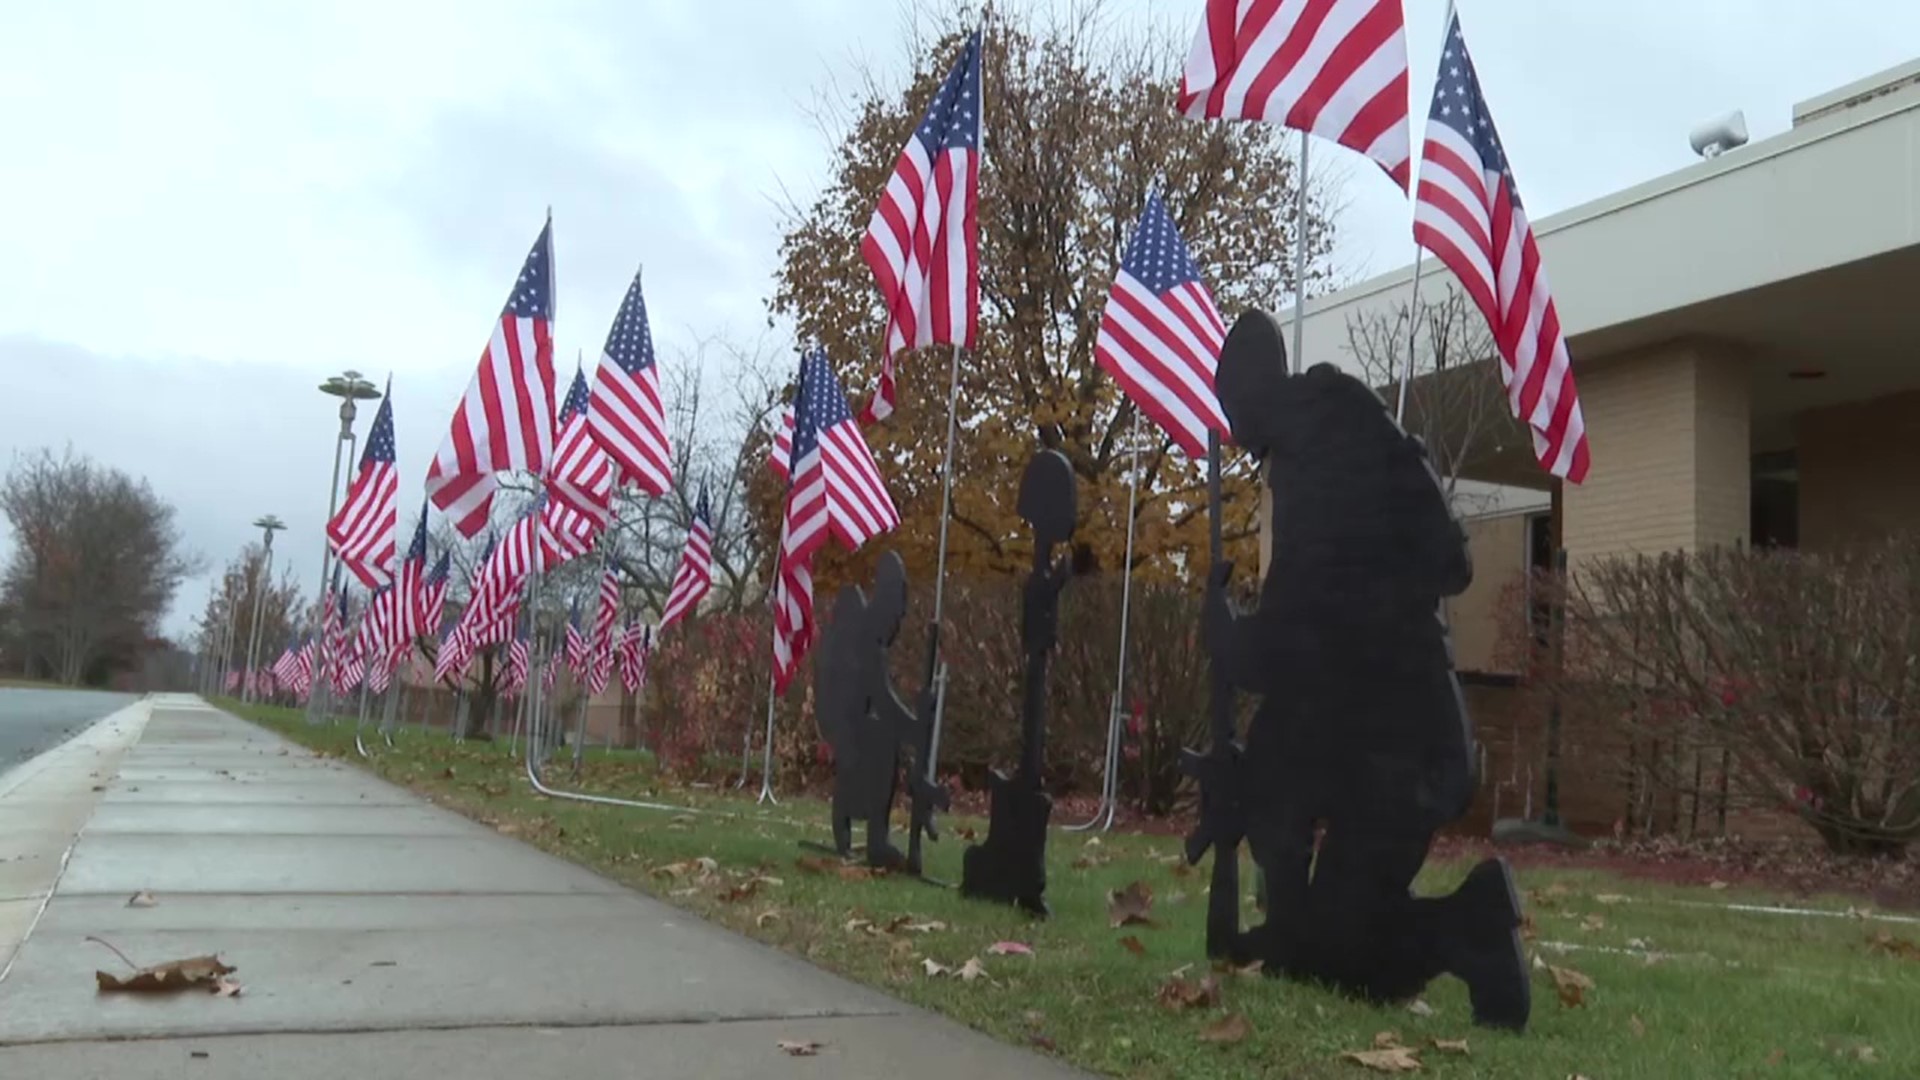 Veterans Day looks a little different in Wayne and Pike Counties for people honoring those who served our country.